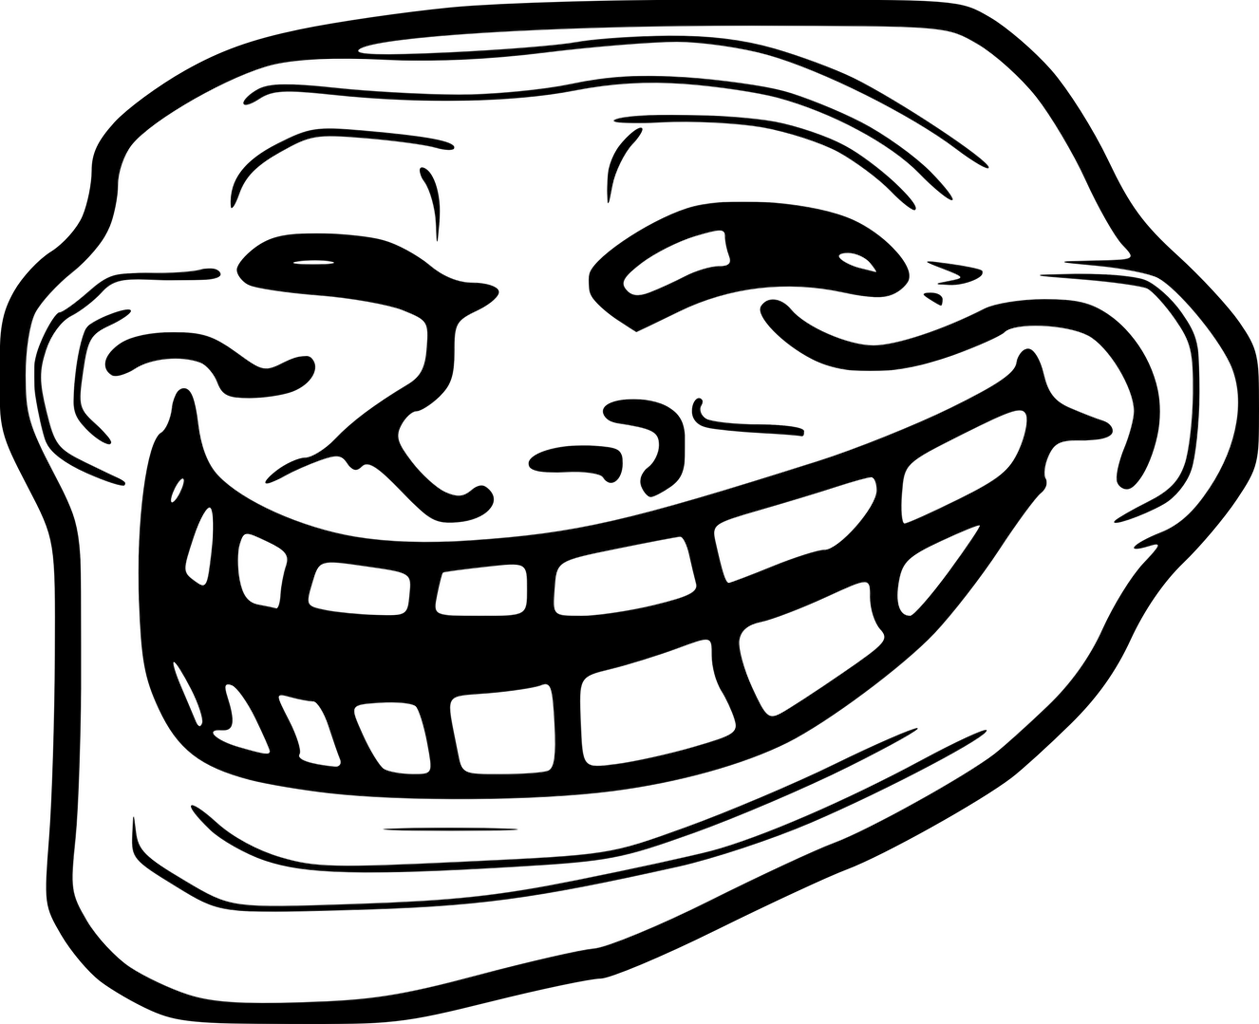 1259px-Troll_Face.png